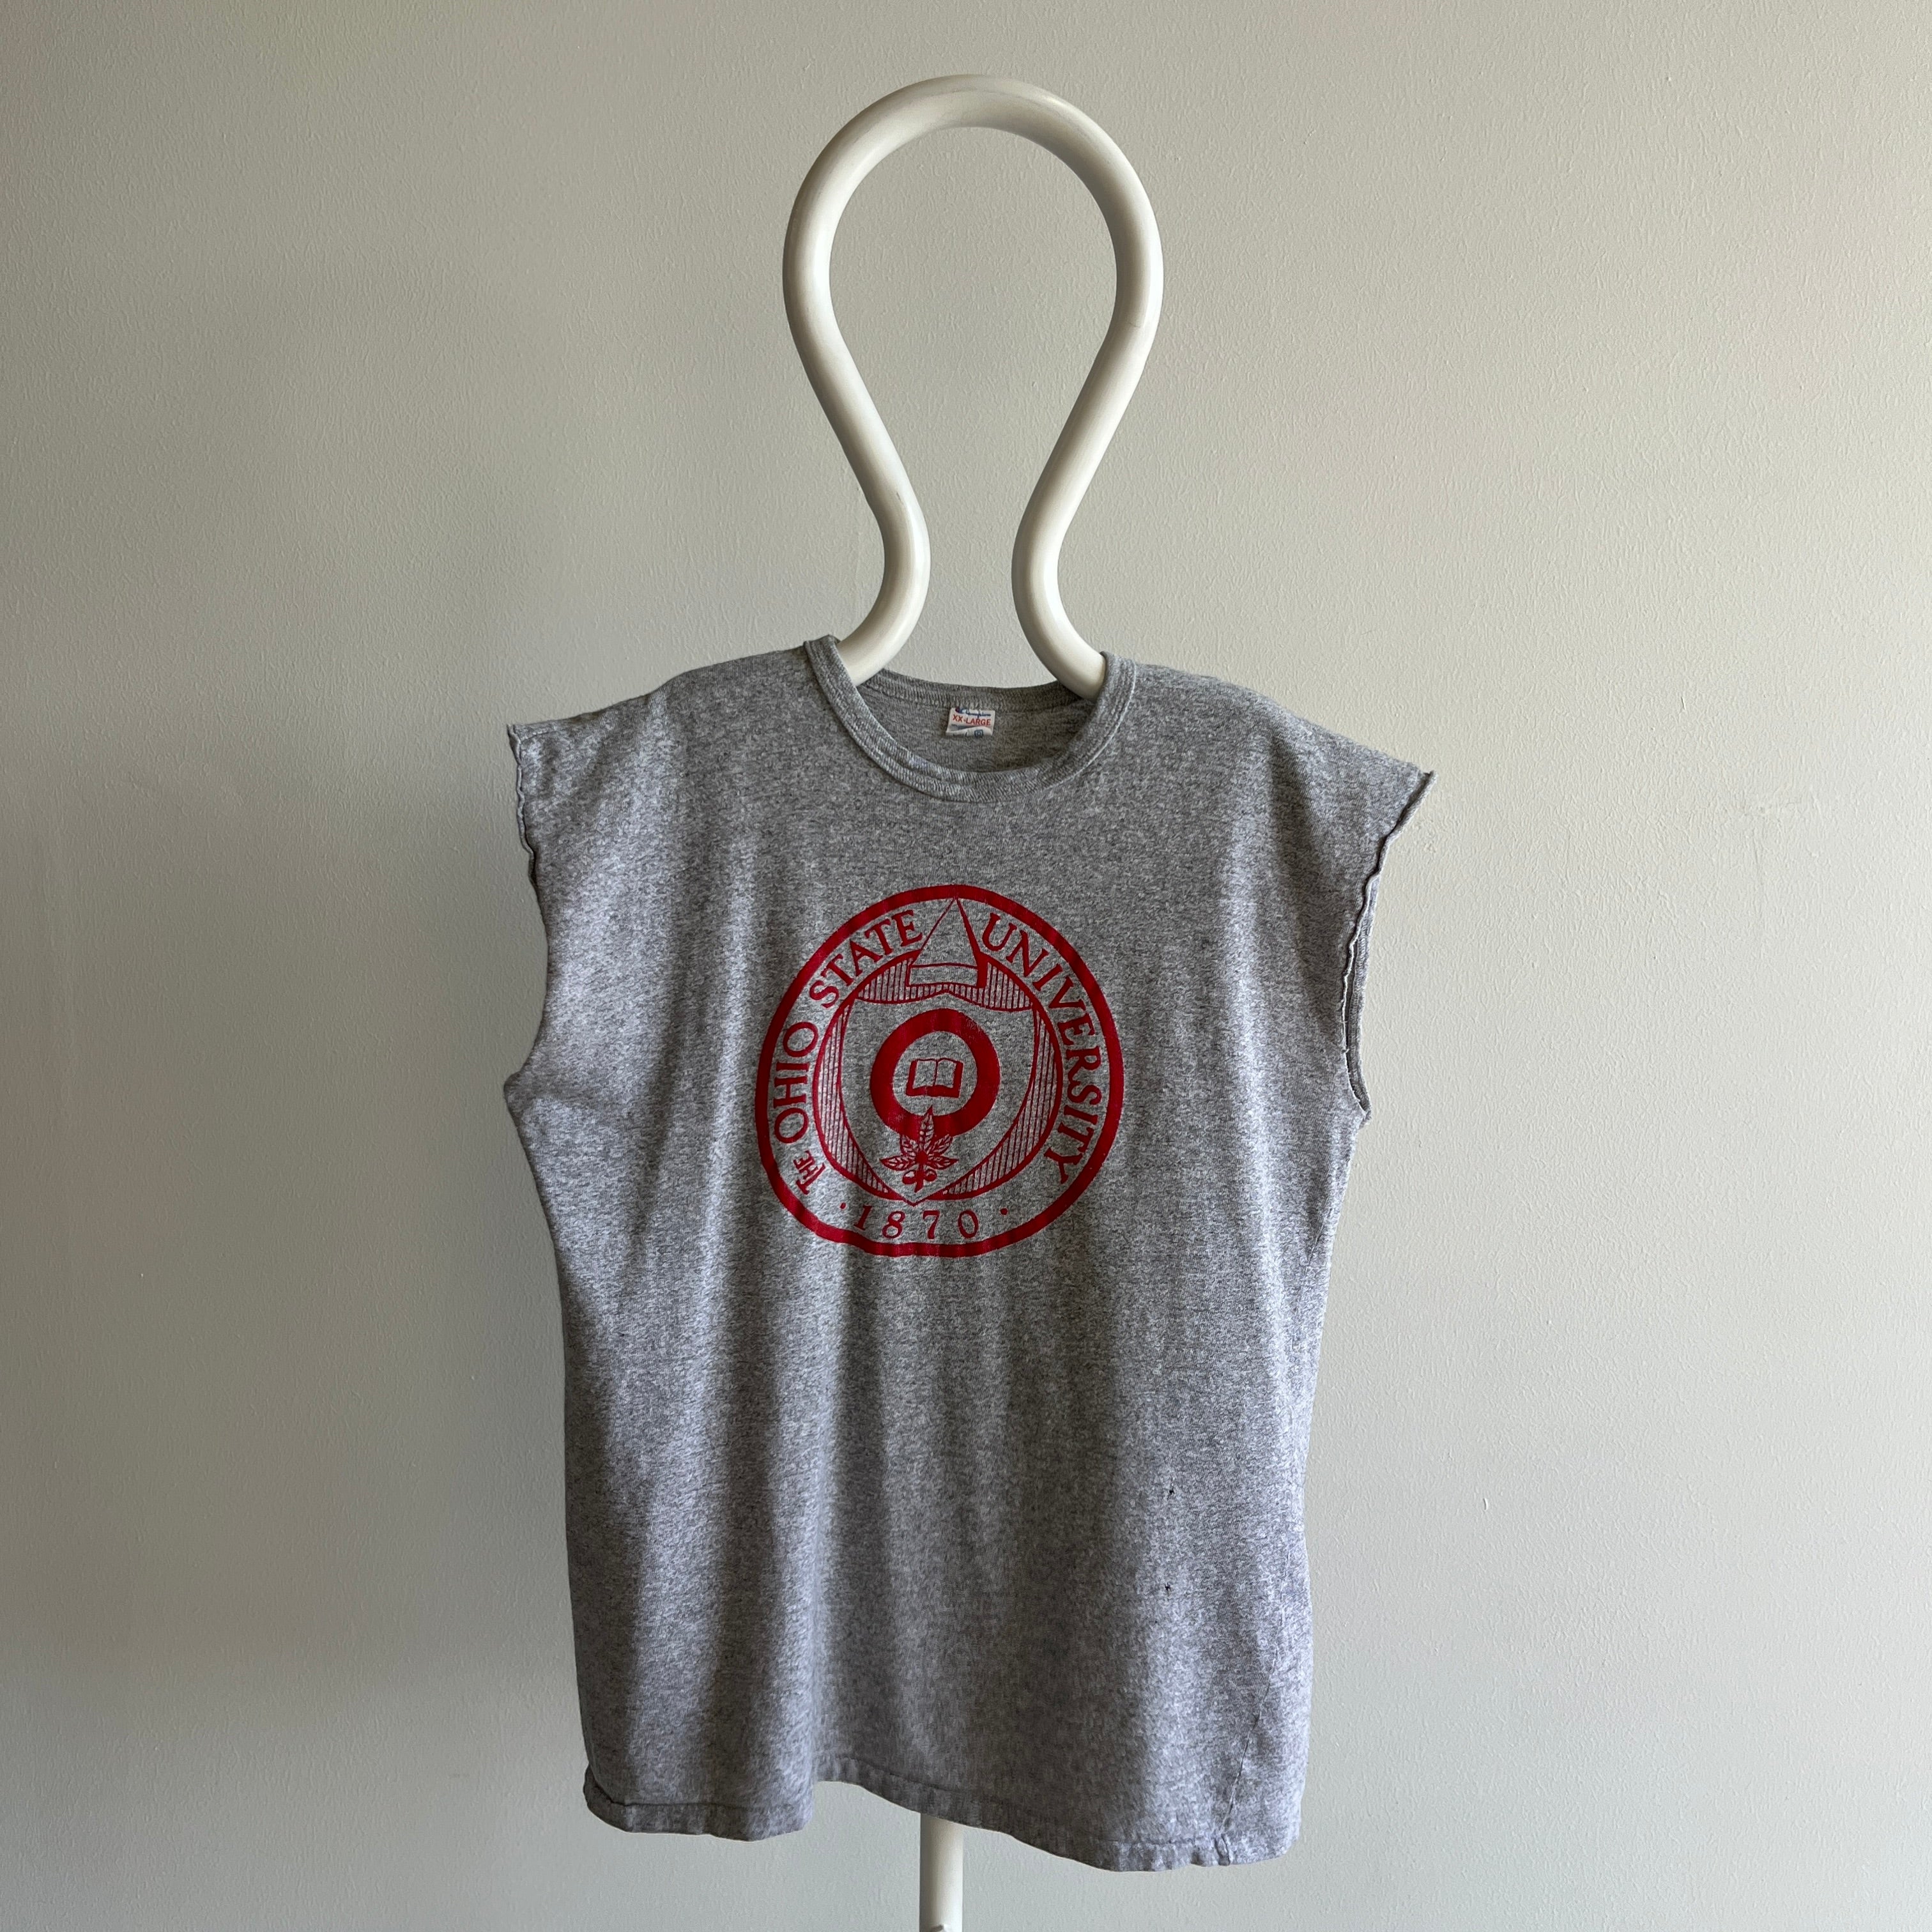 1980s The Ohio State Cut Sleeve T-Shirt by Champion Brand